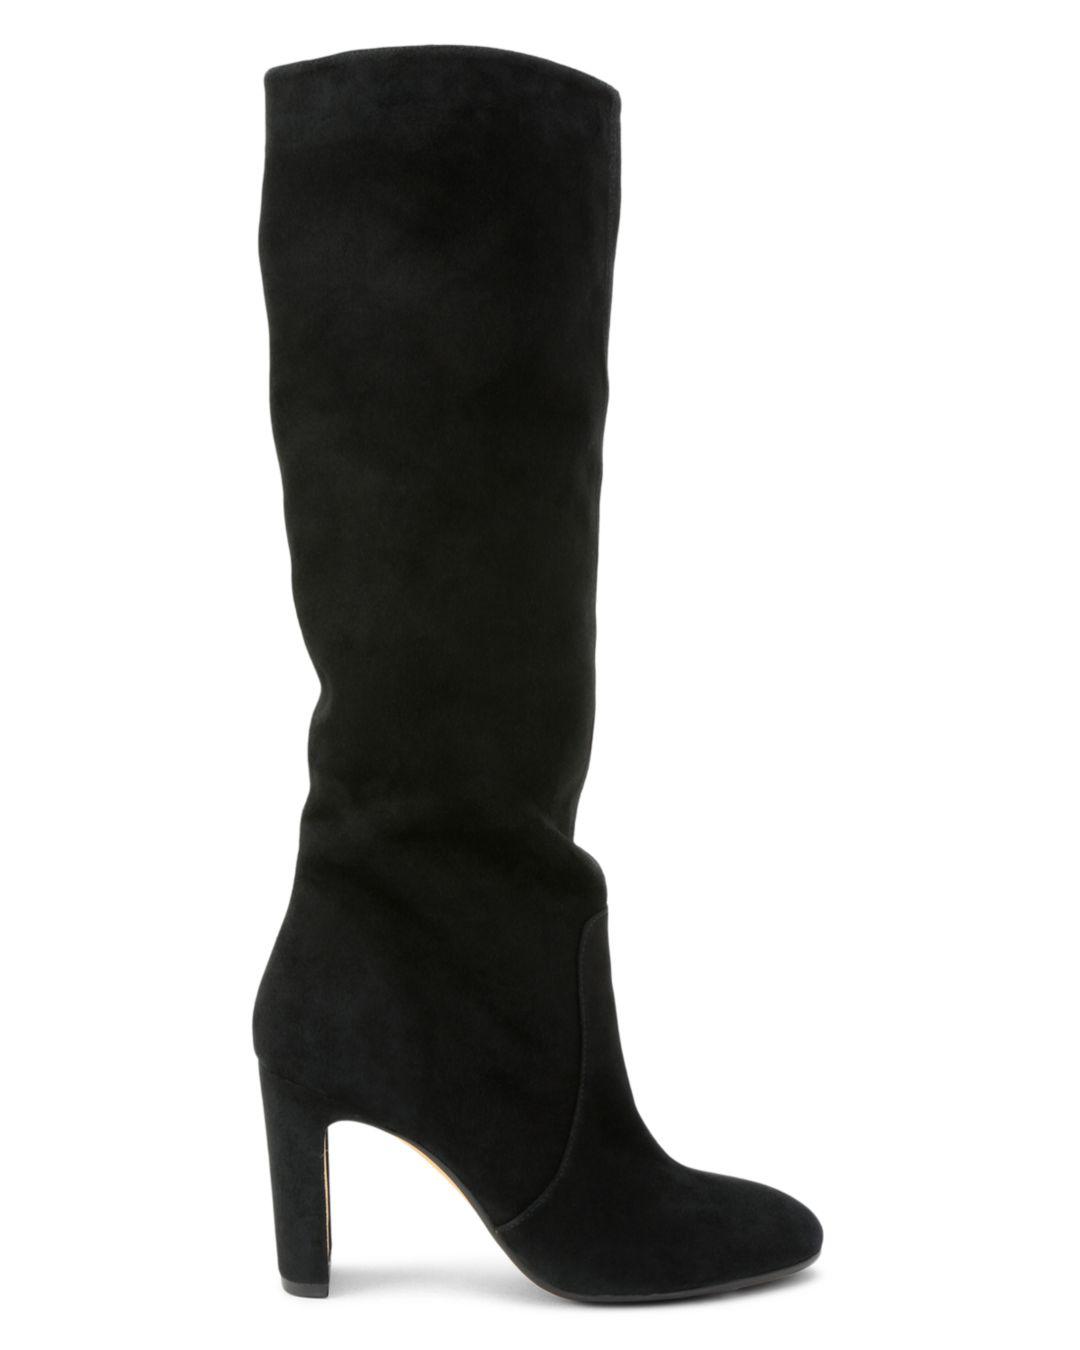 Dolce Vita Women's Coop Slouchy Suede Tall Boots in Black - Lyst